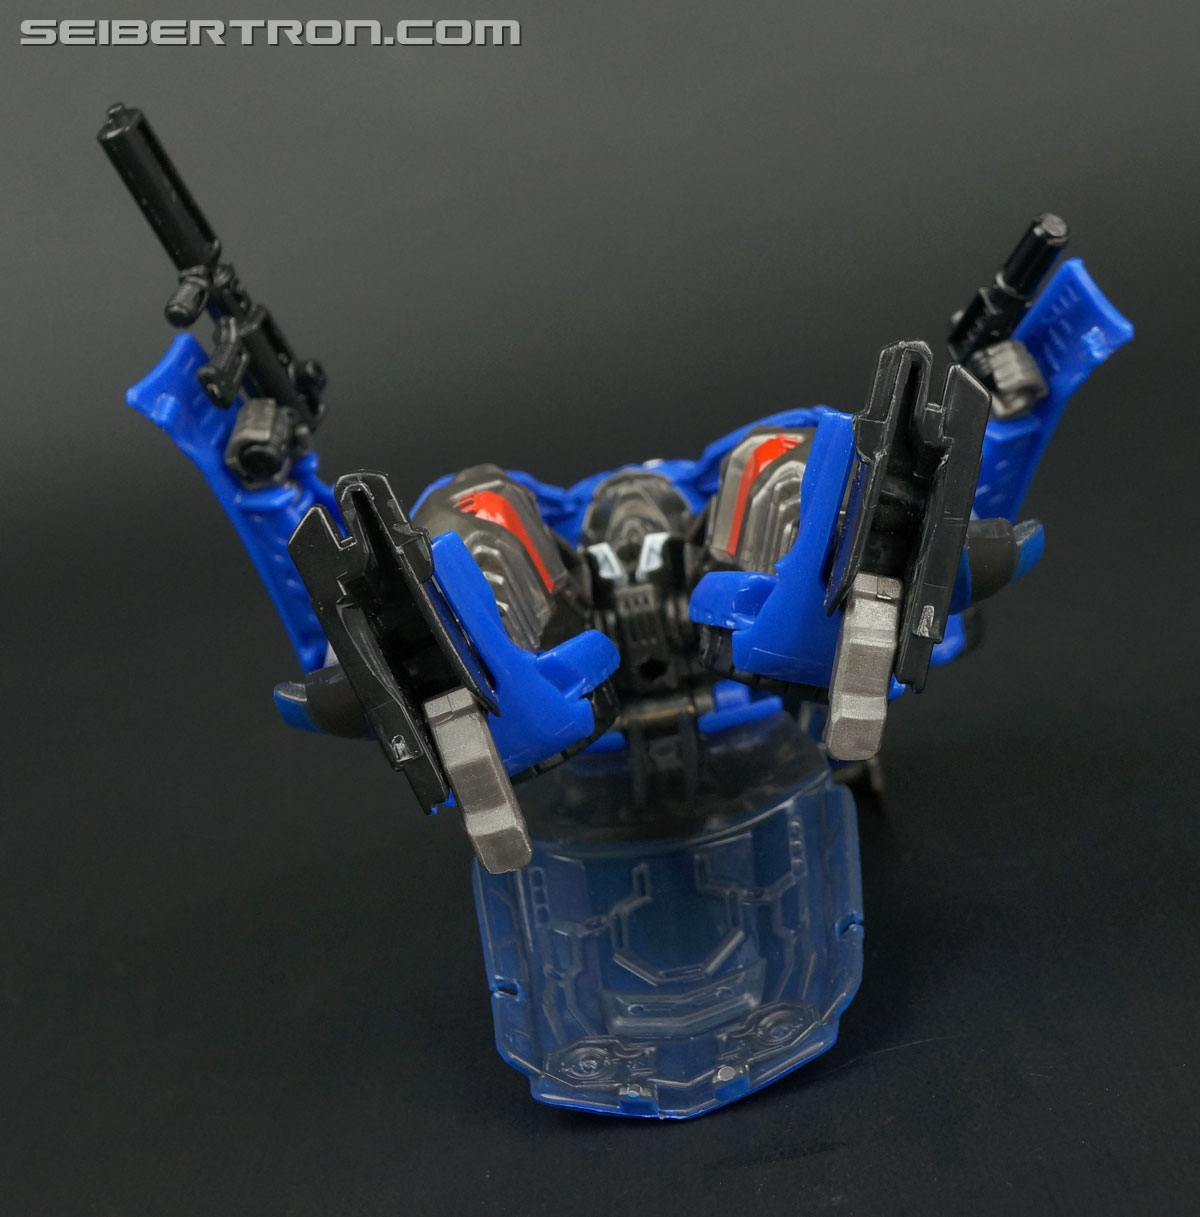 transformers age of extinction hot shot